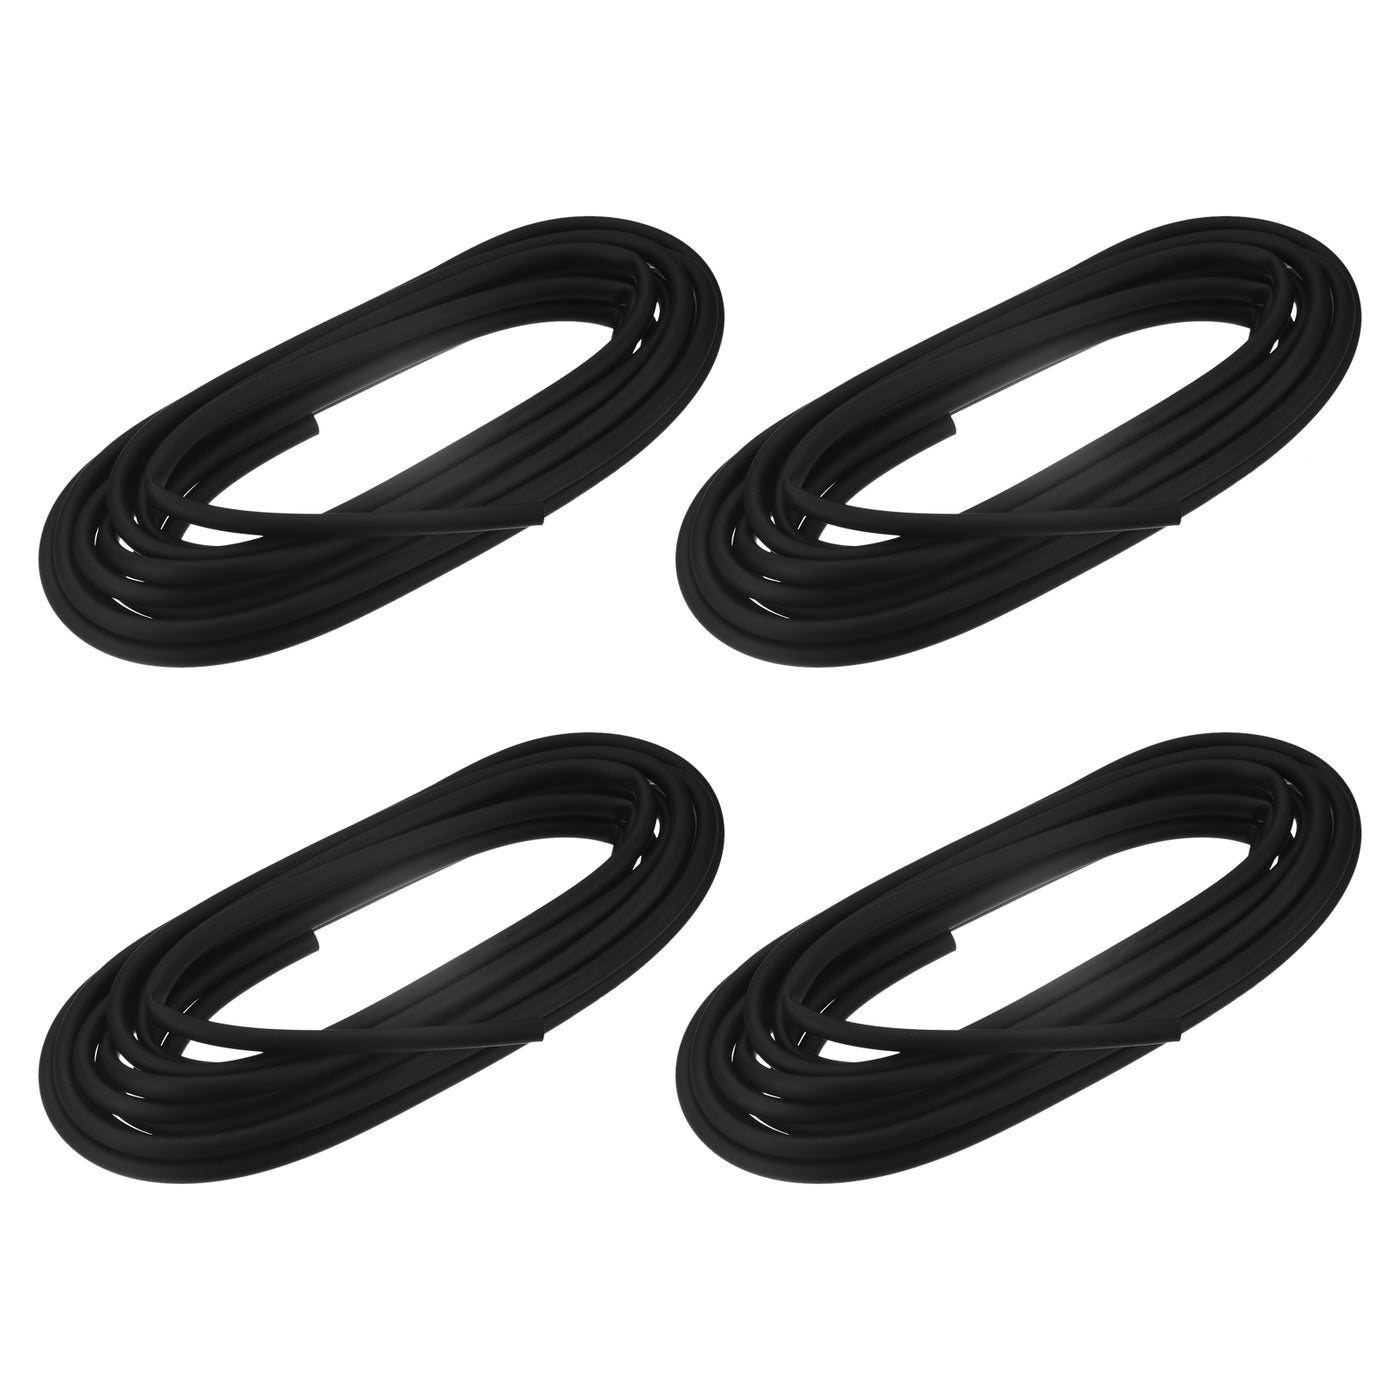 uxcell Uxcell Silicone Tubing 5/32" ID, 15/64" OD 4Pcs 13.12 Ft for Pump Transfer, Black